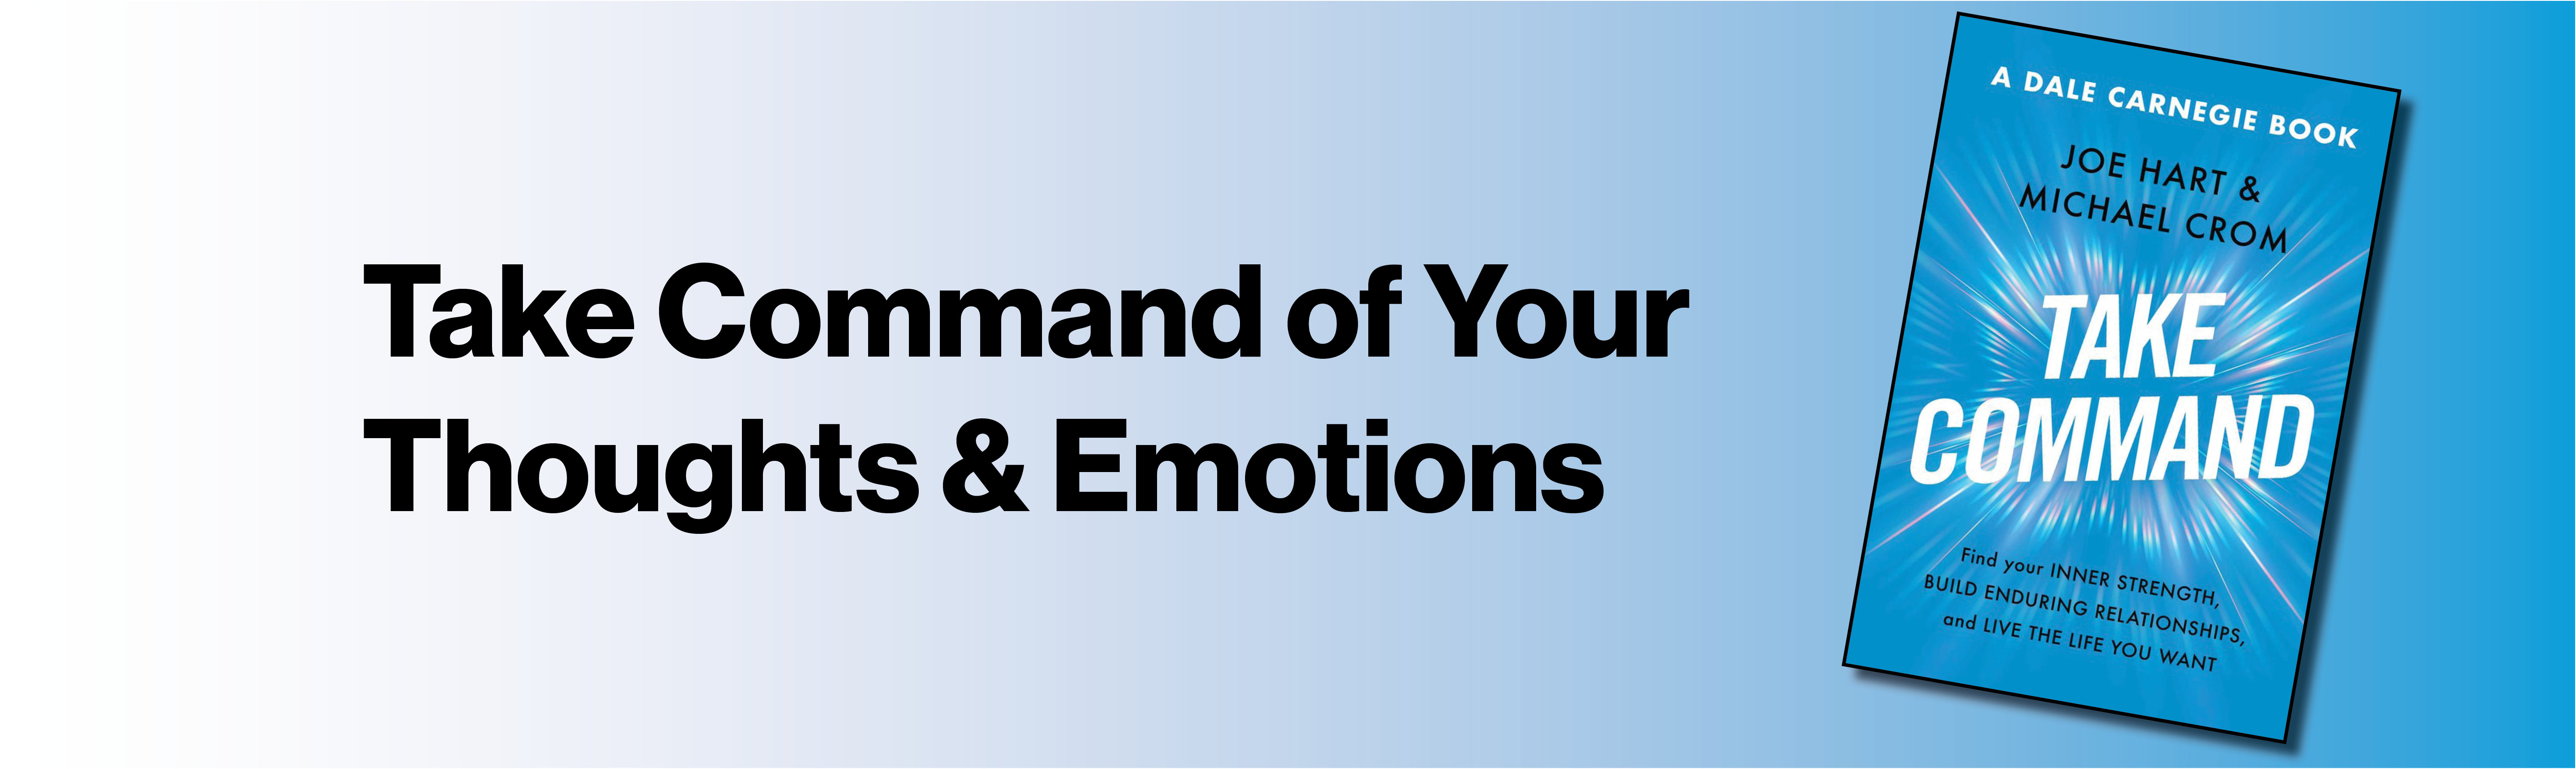 take command of your thoughts and emotions